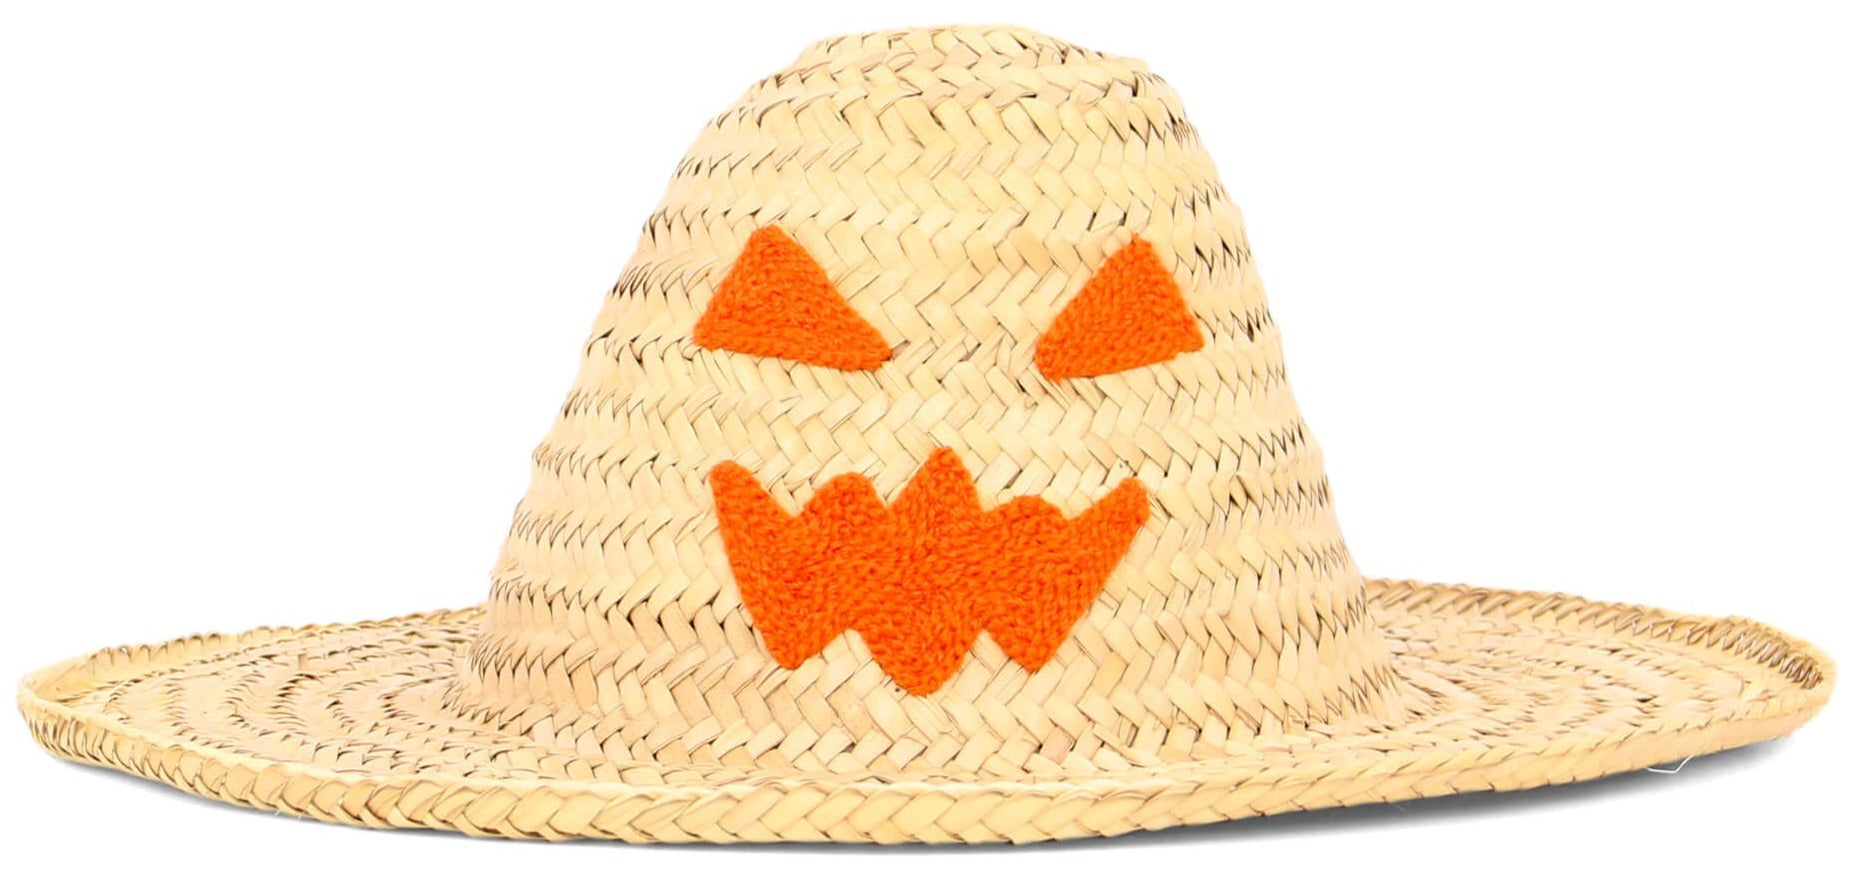 Personalized Witch Hat Wizard magic Hat - Halloween Hats, Witchy Clothing, Pumpkin Hats, Monogram Hats, Halloween Gifts, Straw Hat for Adult - Boo! Pack Of Personalized Halloween Bag & Witch Hat Wizard Magic Hat - Trick Or Treat Bag, Witchy Clothing, Monogram Basket - Halloween Gift